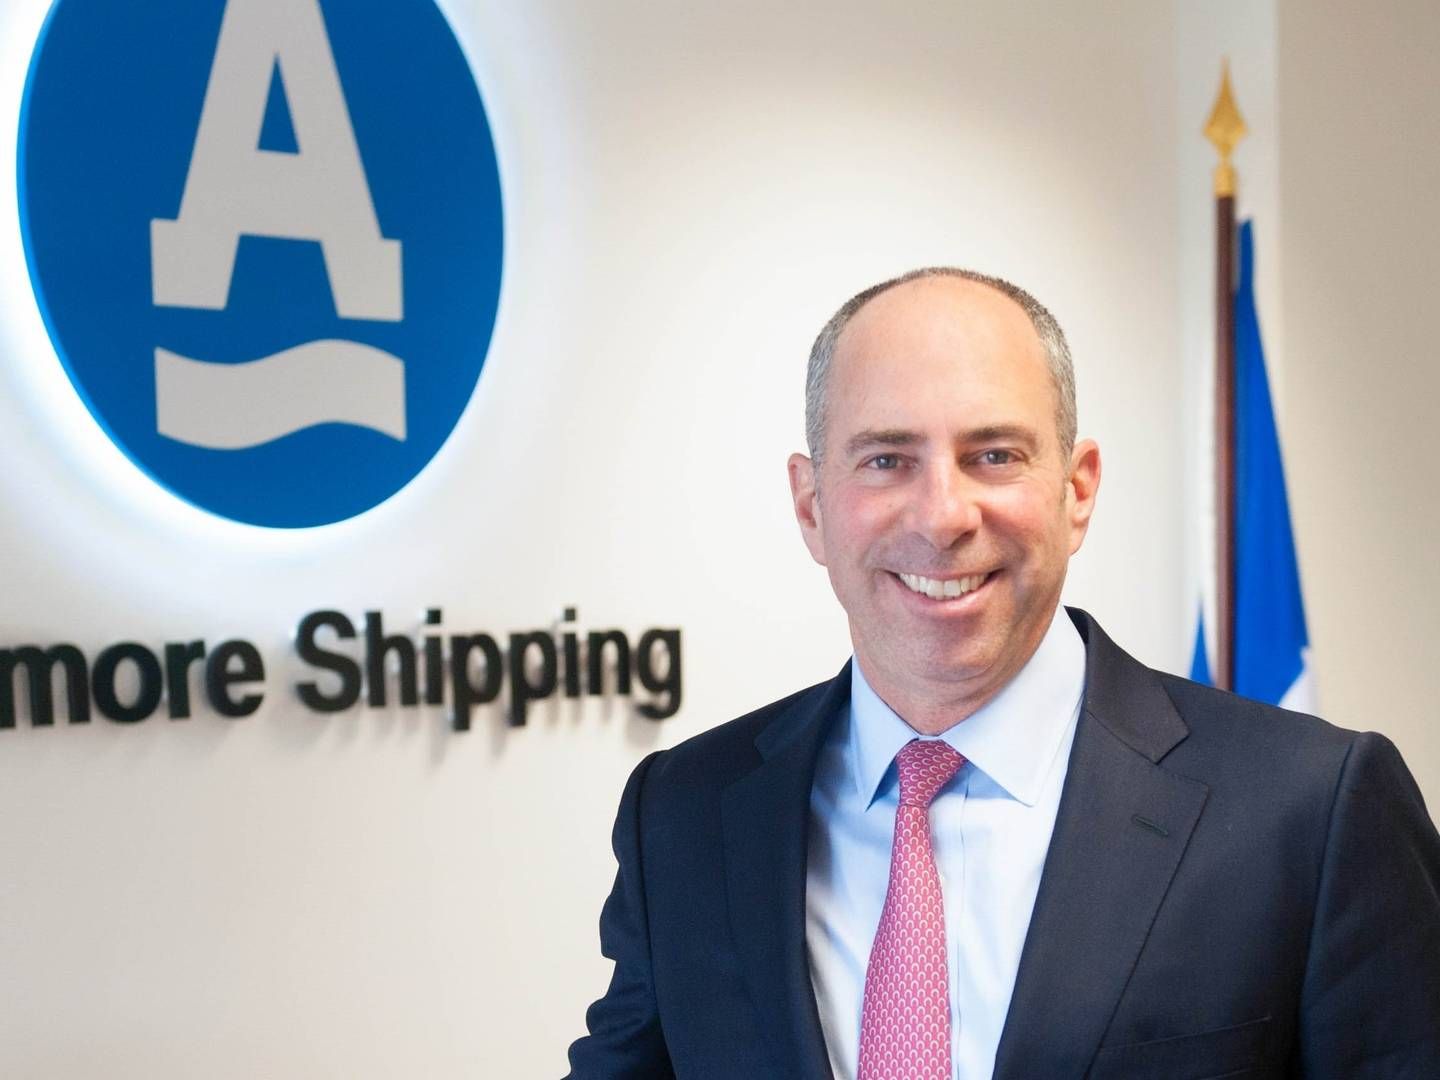 Anthony Gurnee, CEO, Armore Shipping Corporation. | Foto: PR/Ardmore Shipping